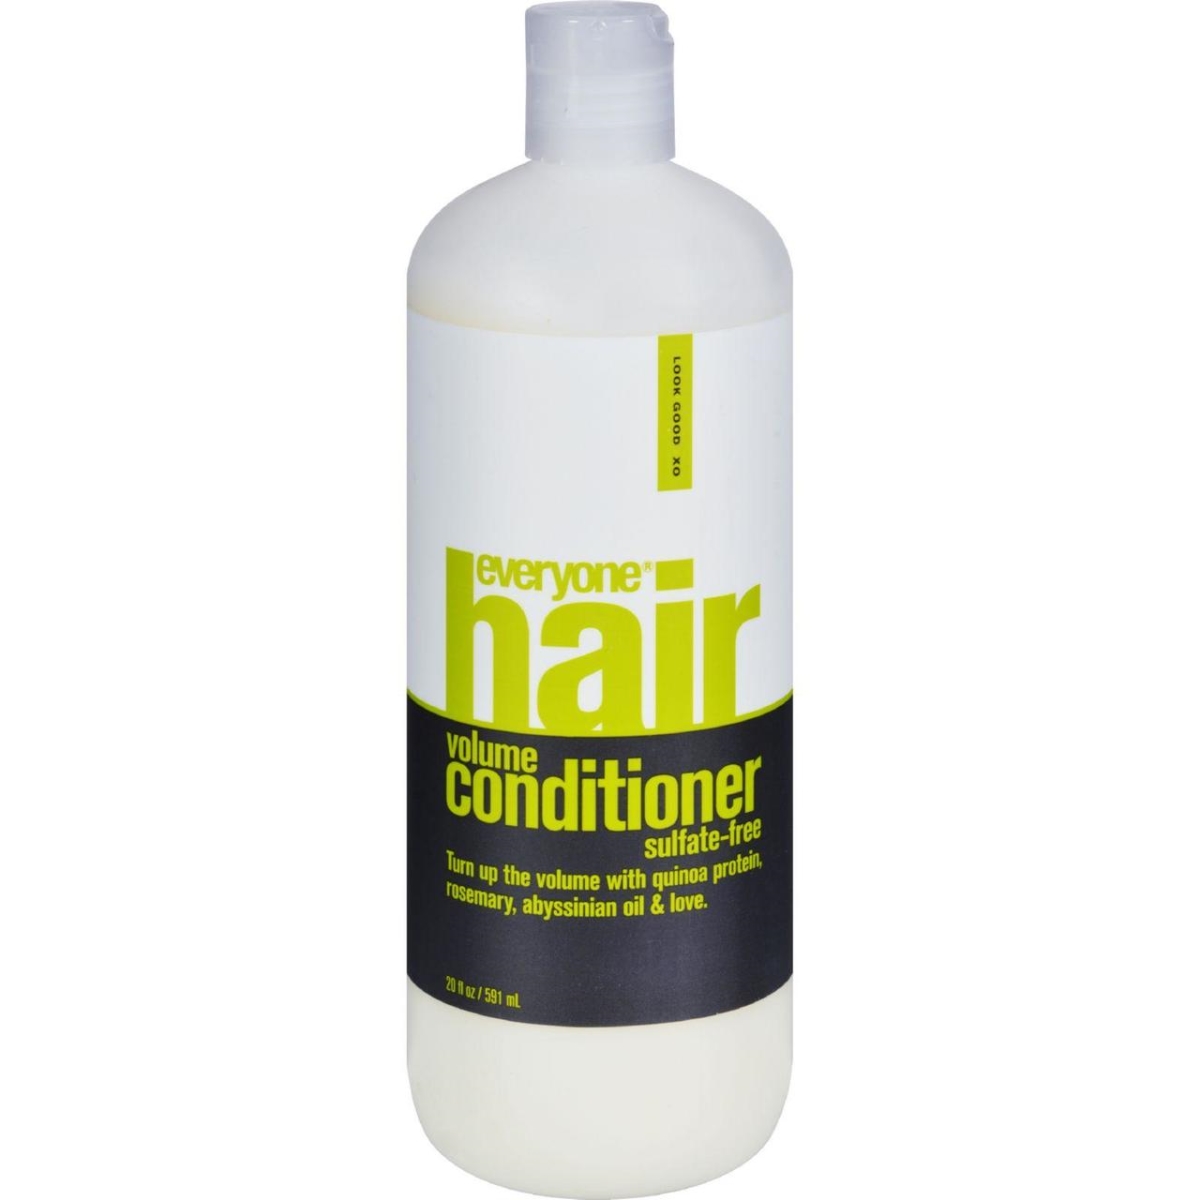 Hg1513738 20 Fl Oz Sulfate Free Conditioner For Everyone Hair